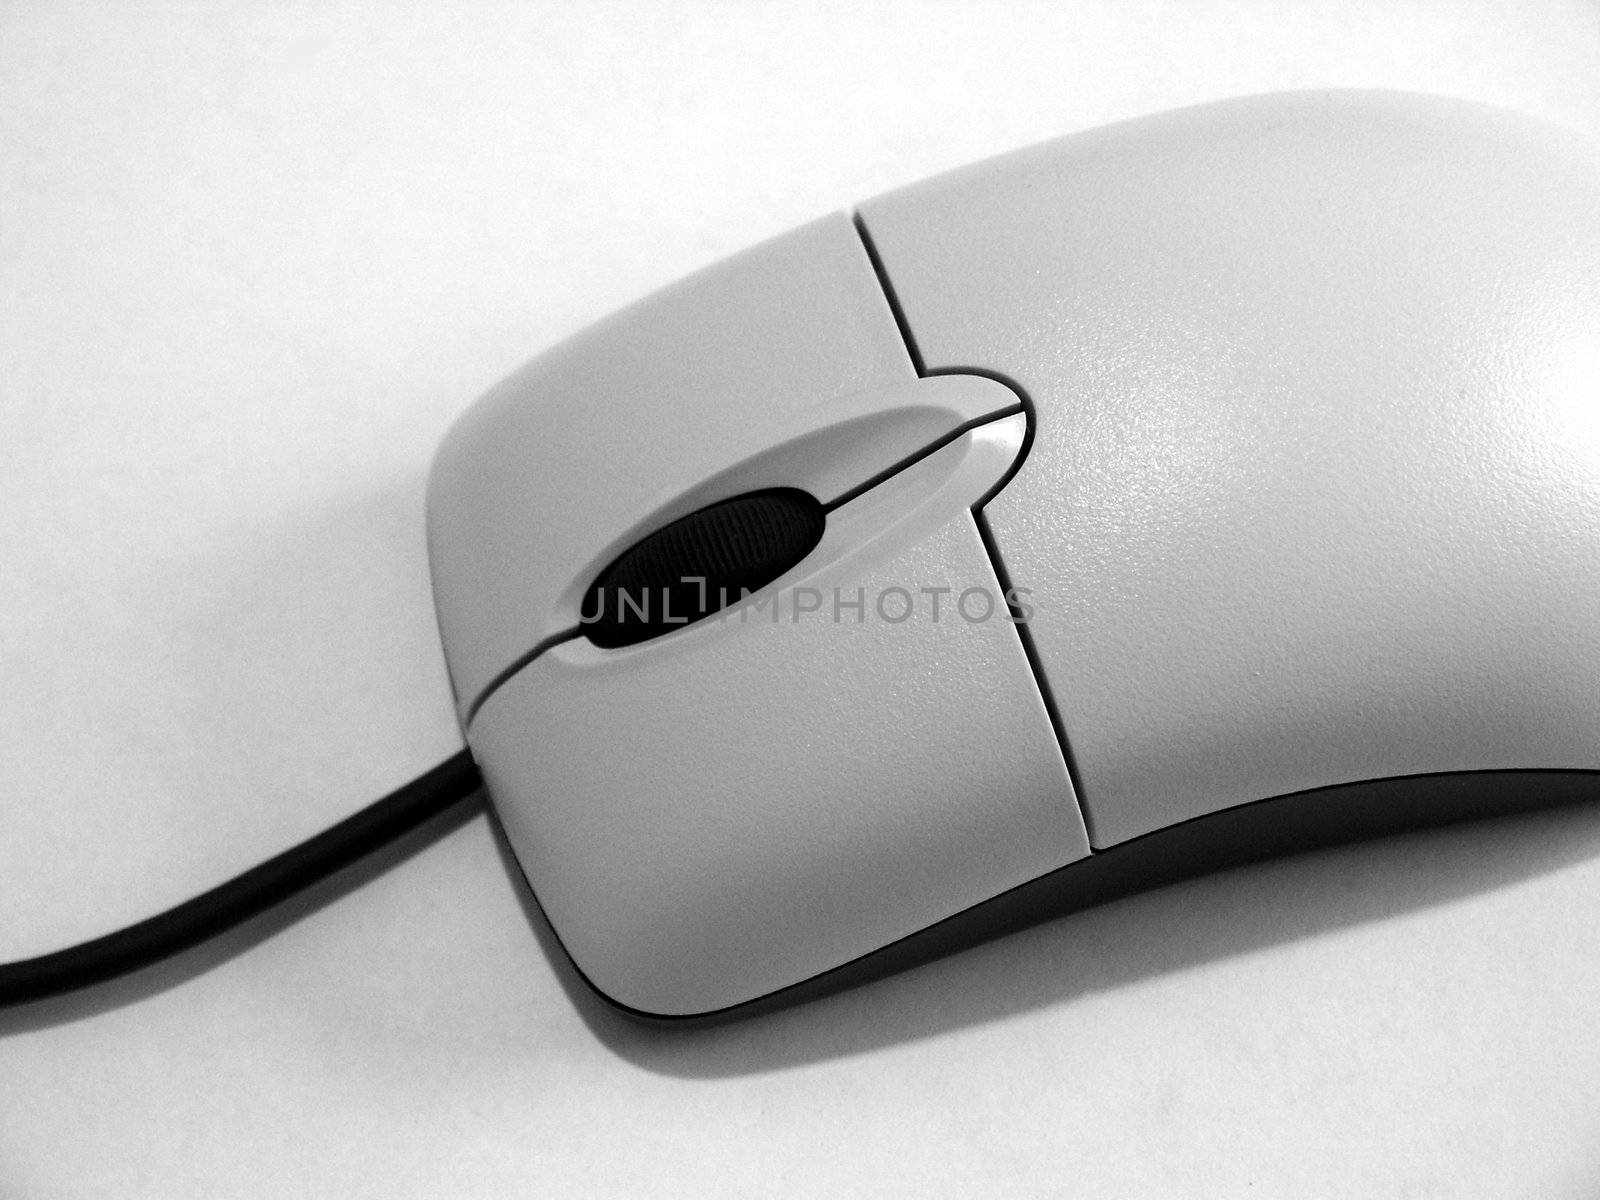 A nice clean shot of a computer mouse.